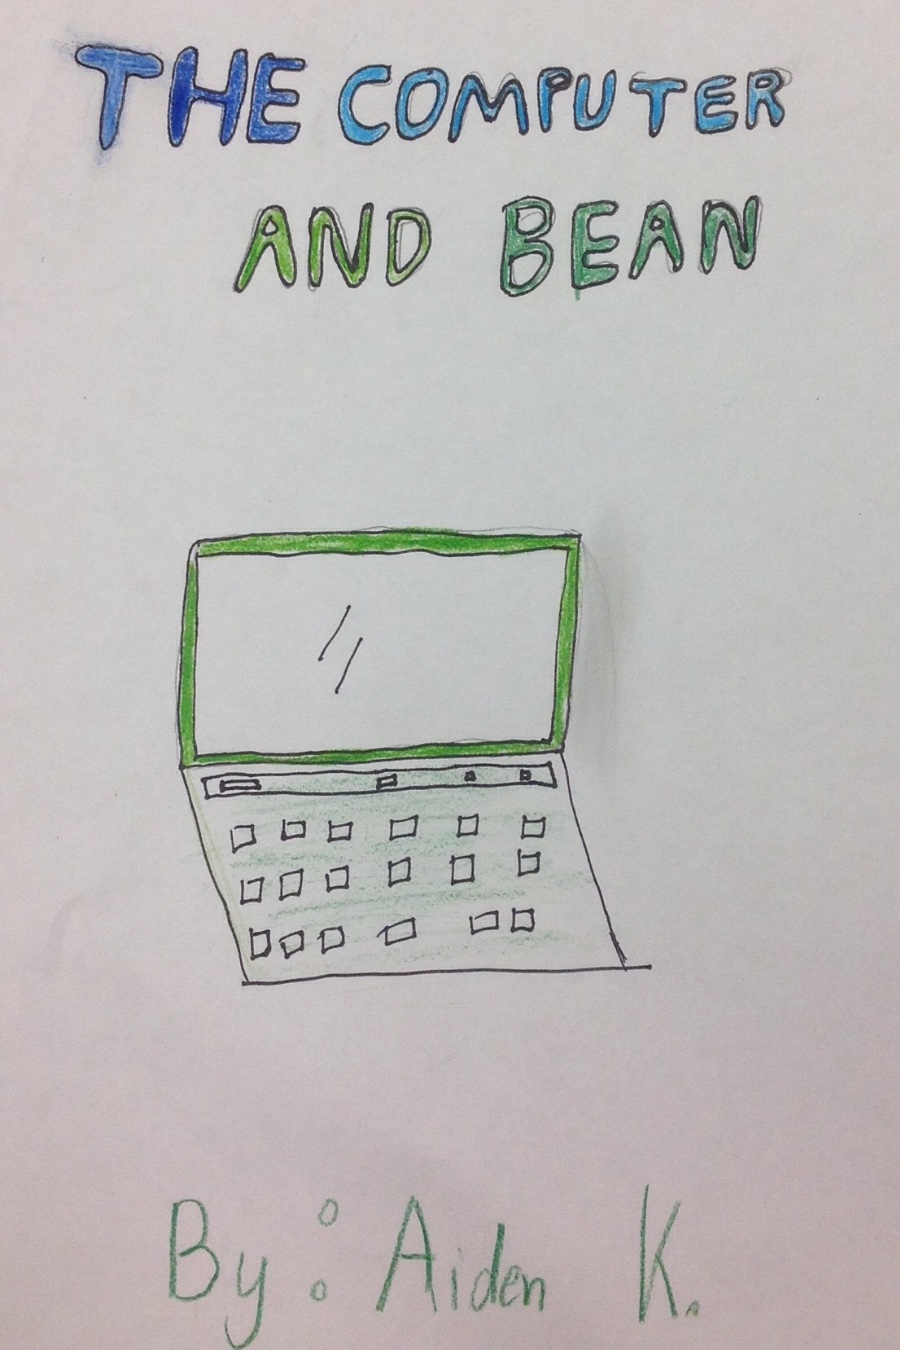 The Computer and Bean by Aiden K